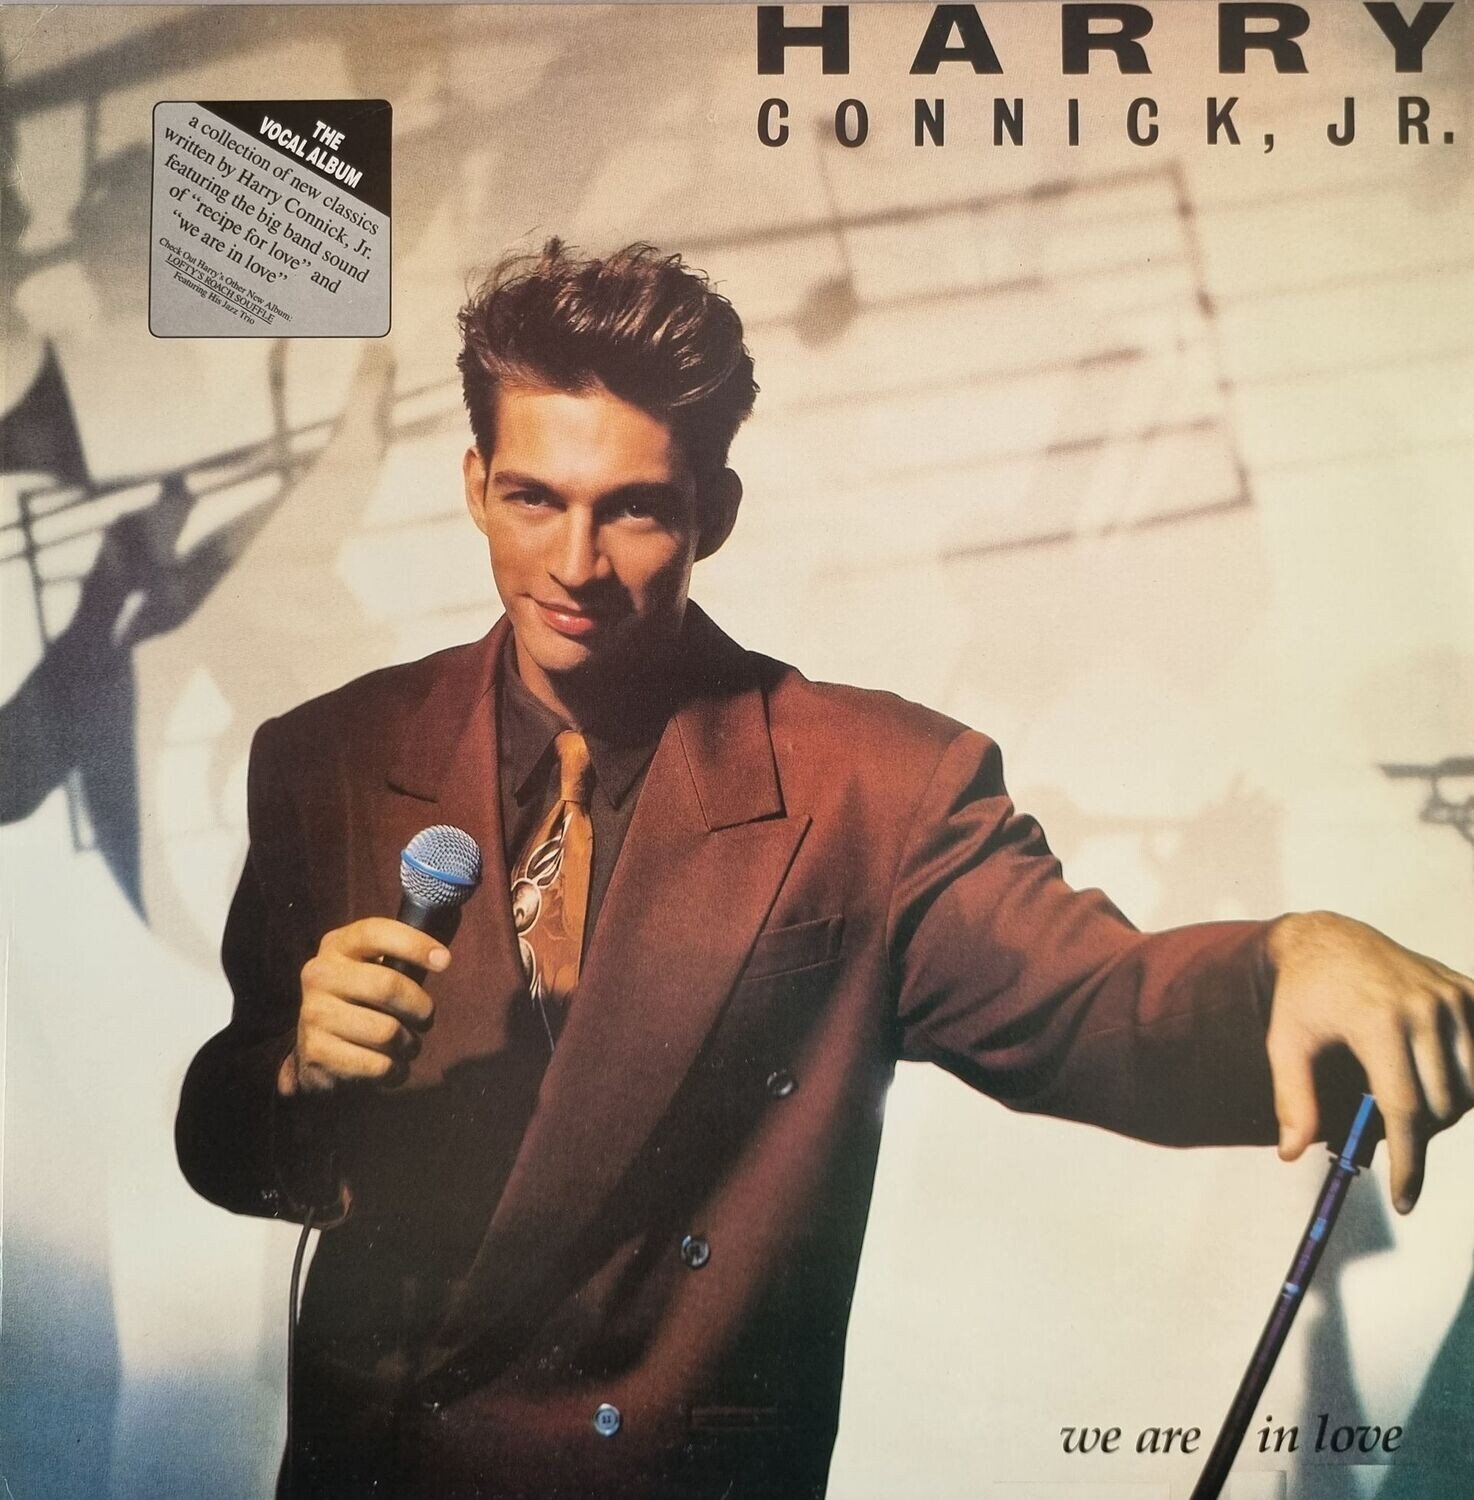 Harry Connick, Jr. – We Are In Love (1990)